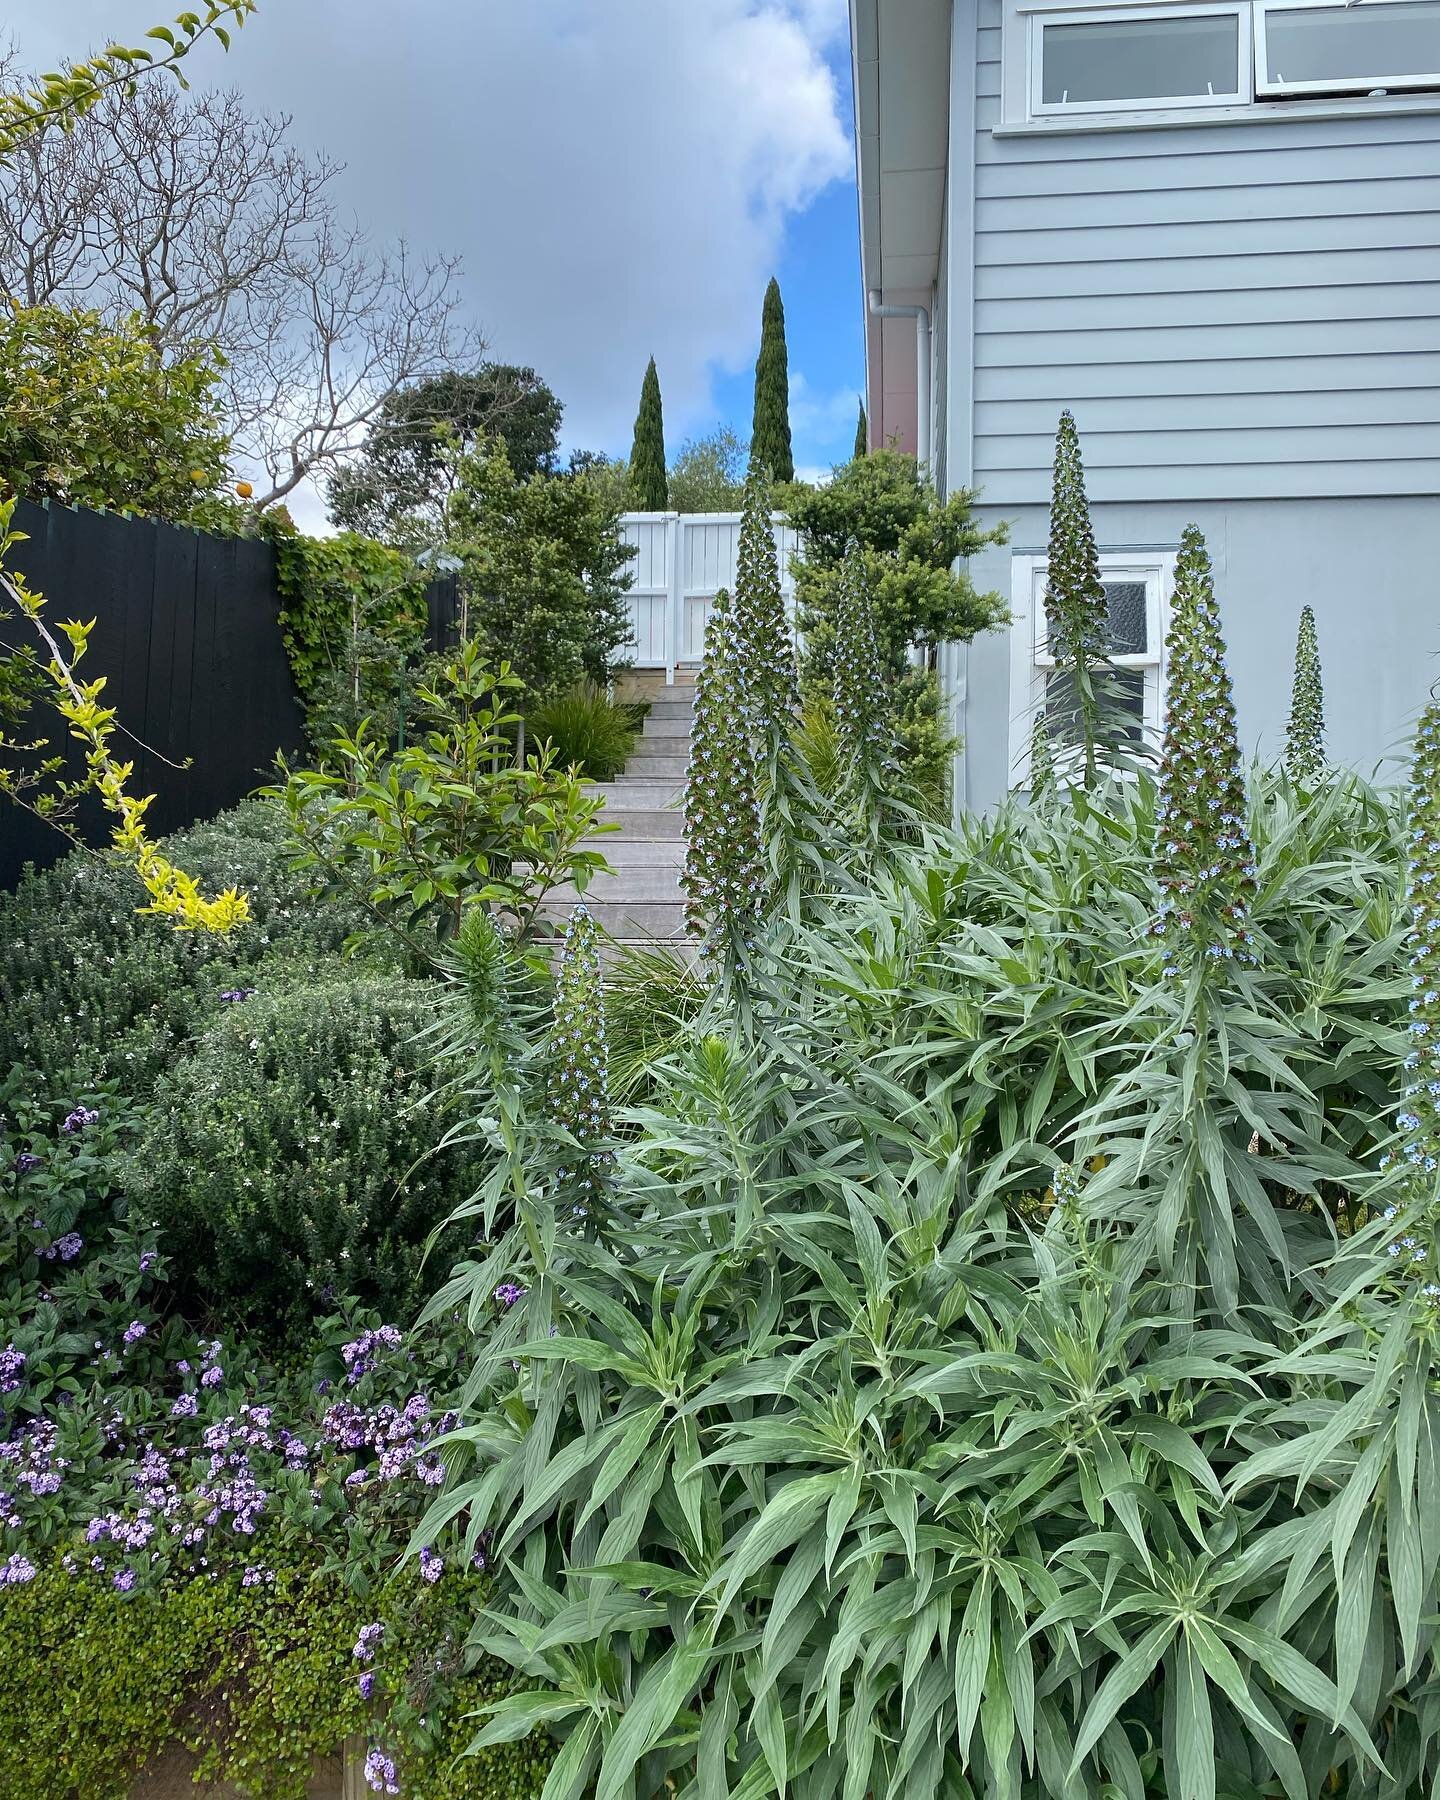 The strong form of Echium &lsquo;Pride of Madeira&rsquo; is echoed behind in my neighbours garden with pencil pines. Like to say I planned it that way😉